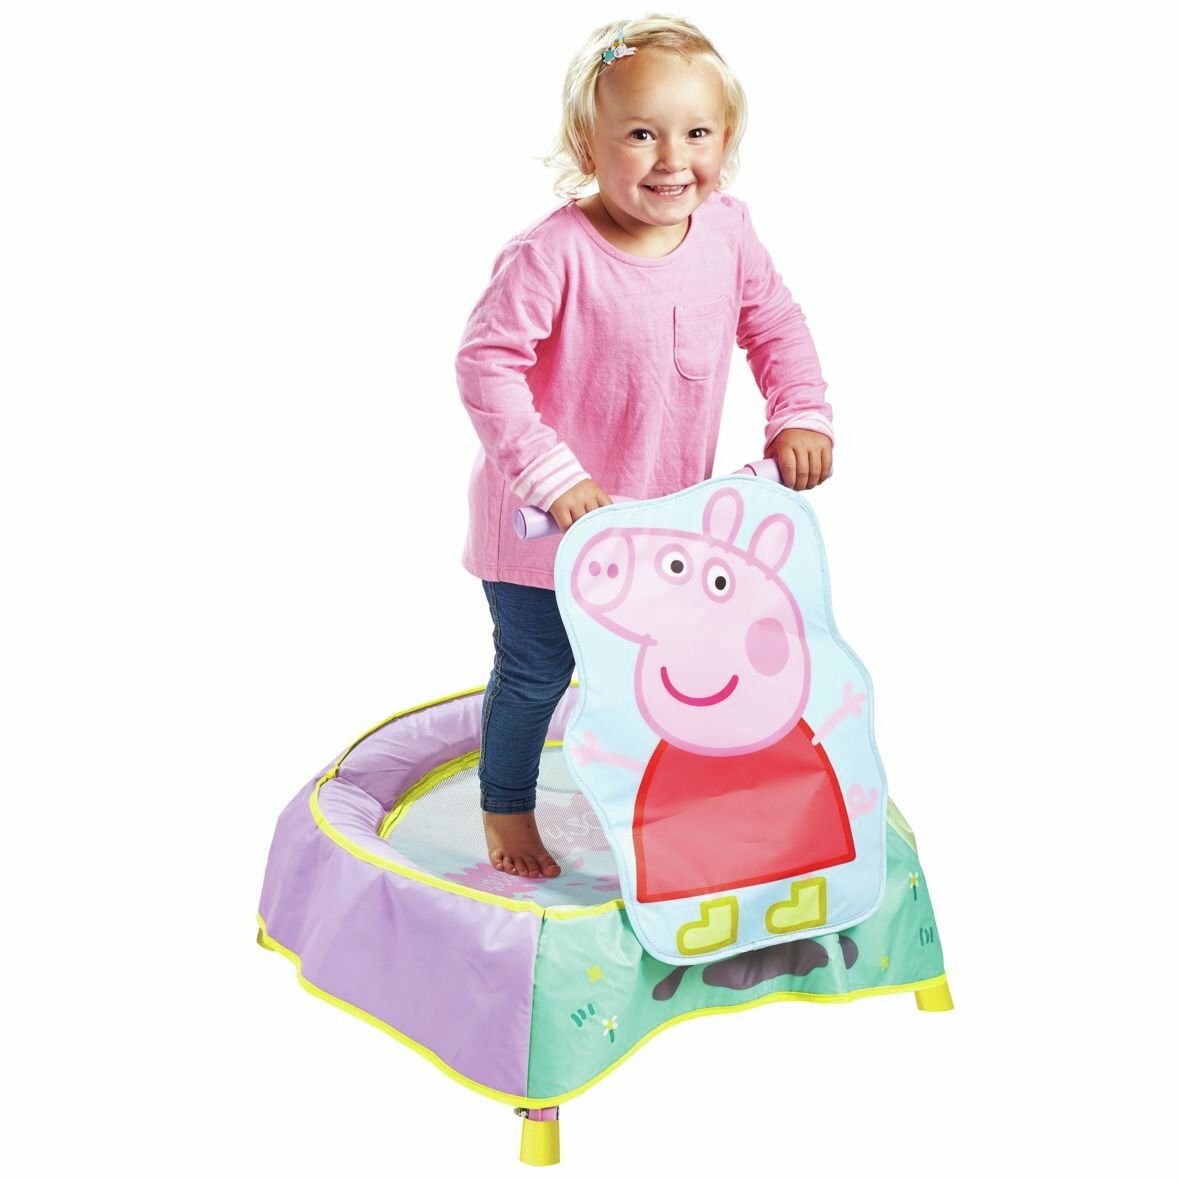 Peppa Pig Toddler Trampoline Review